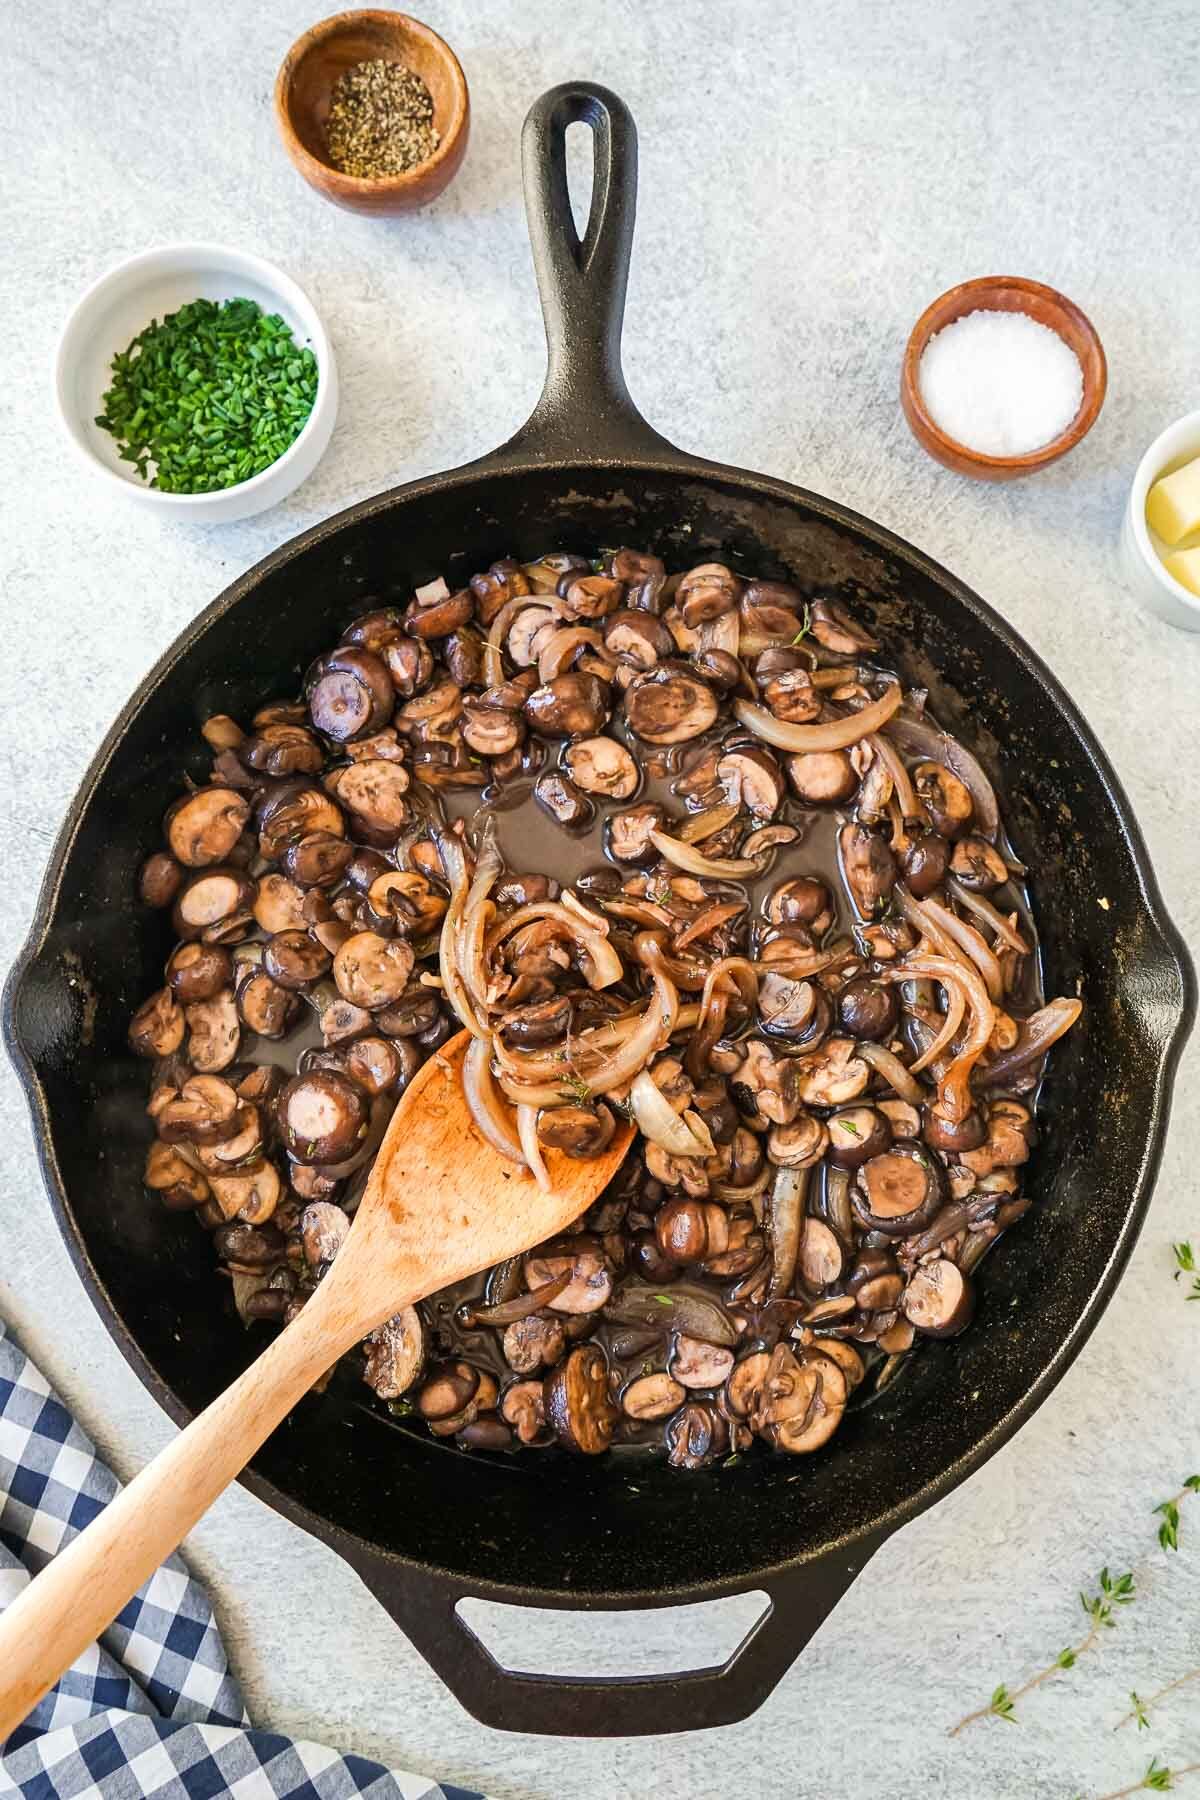 Sautéed mushrooms and onions in a cast iron skillet with a wooden spoon.